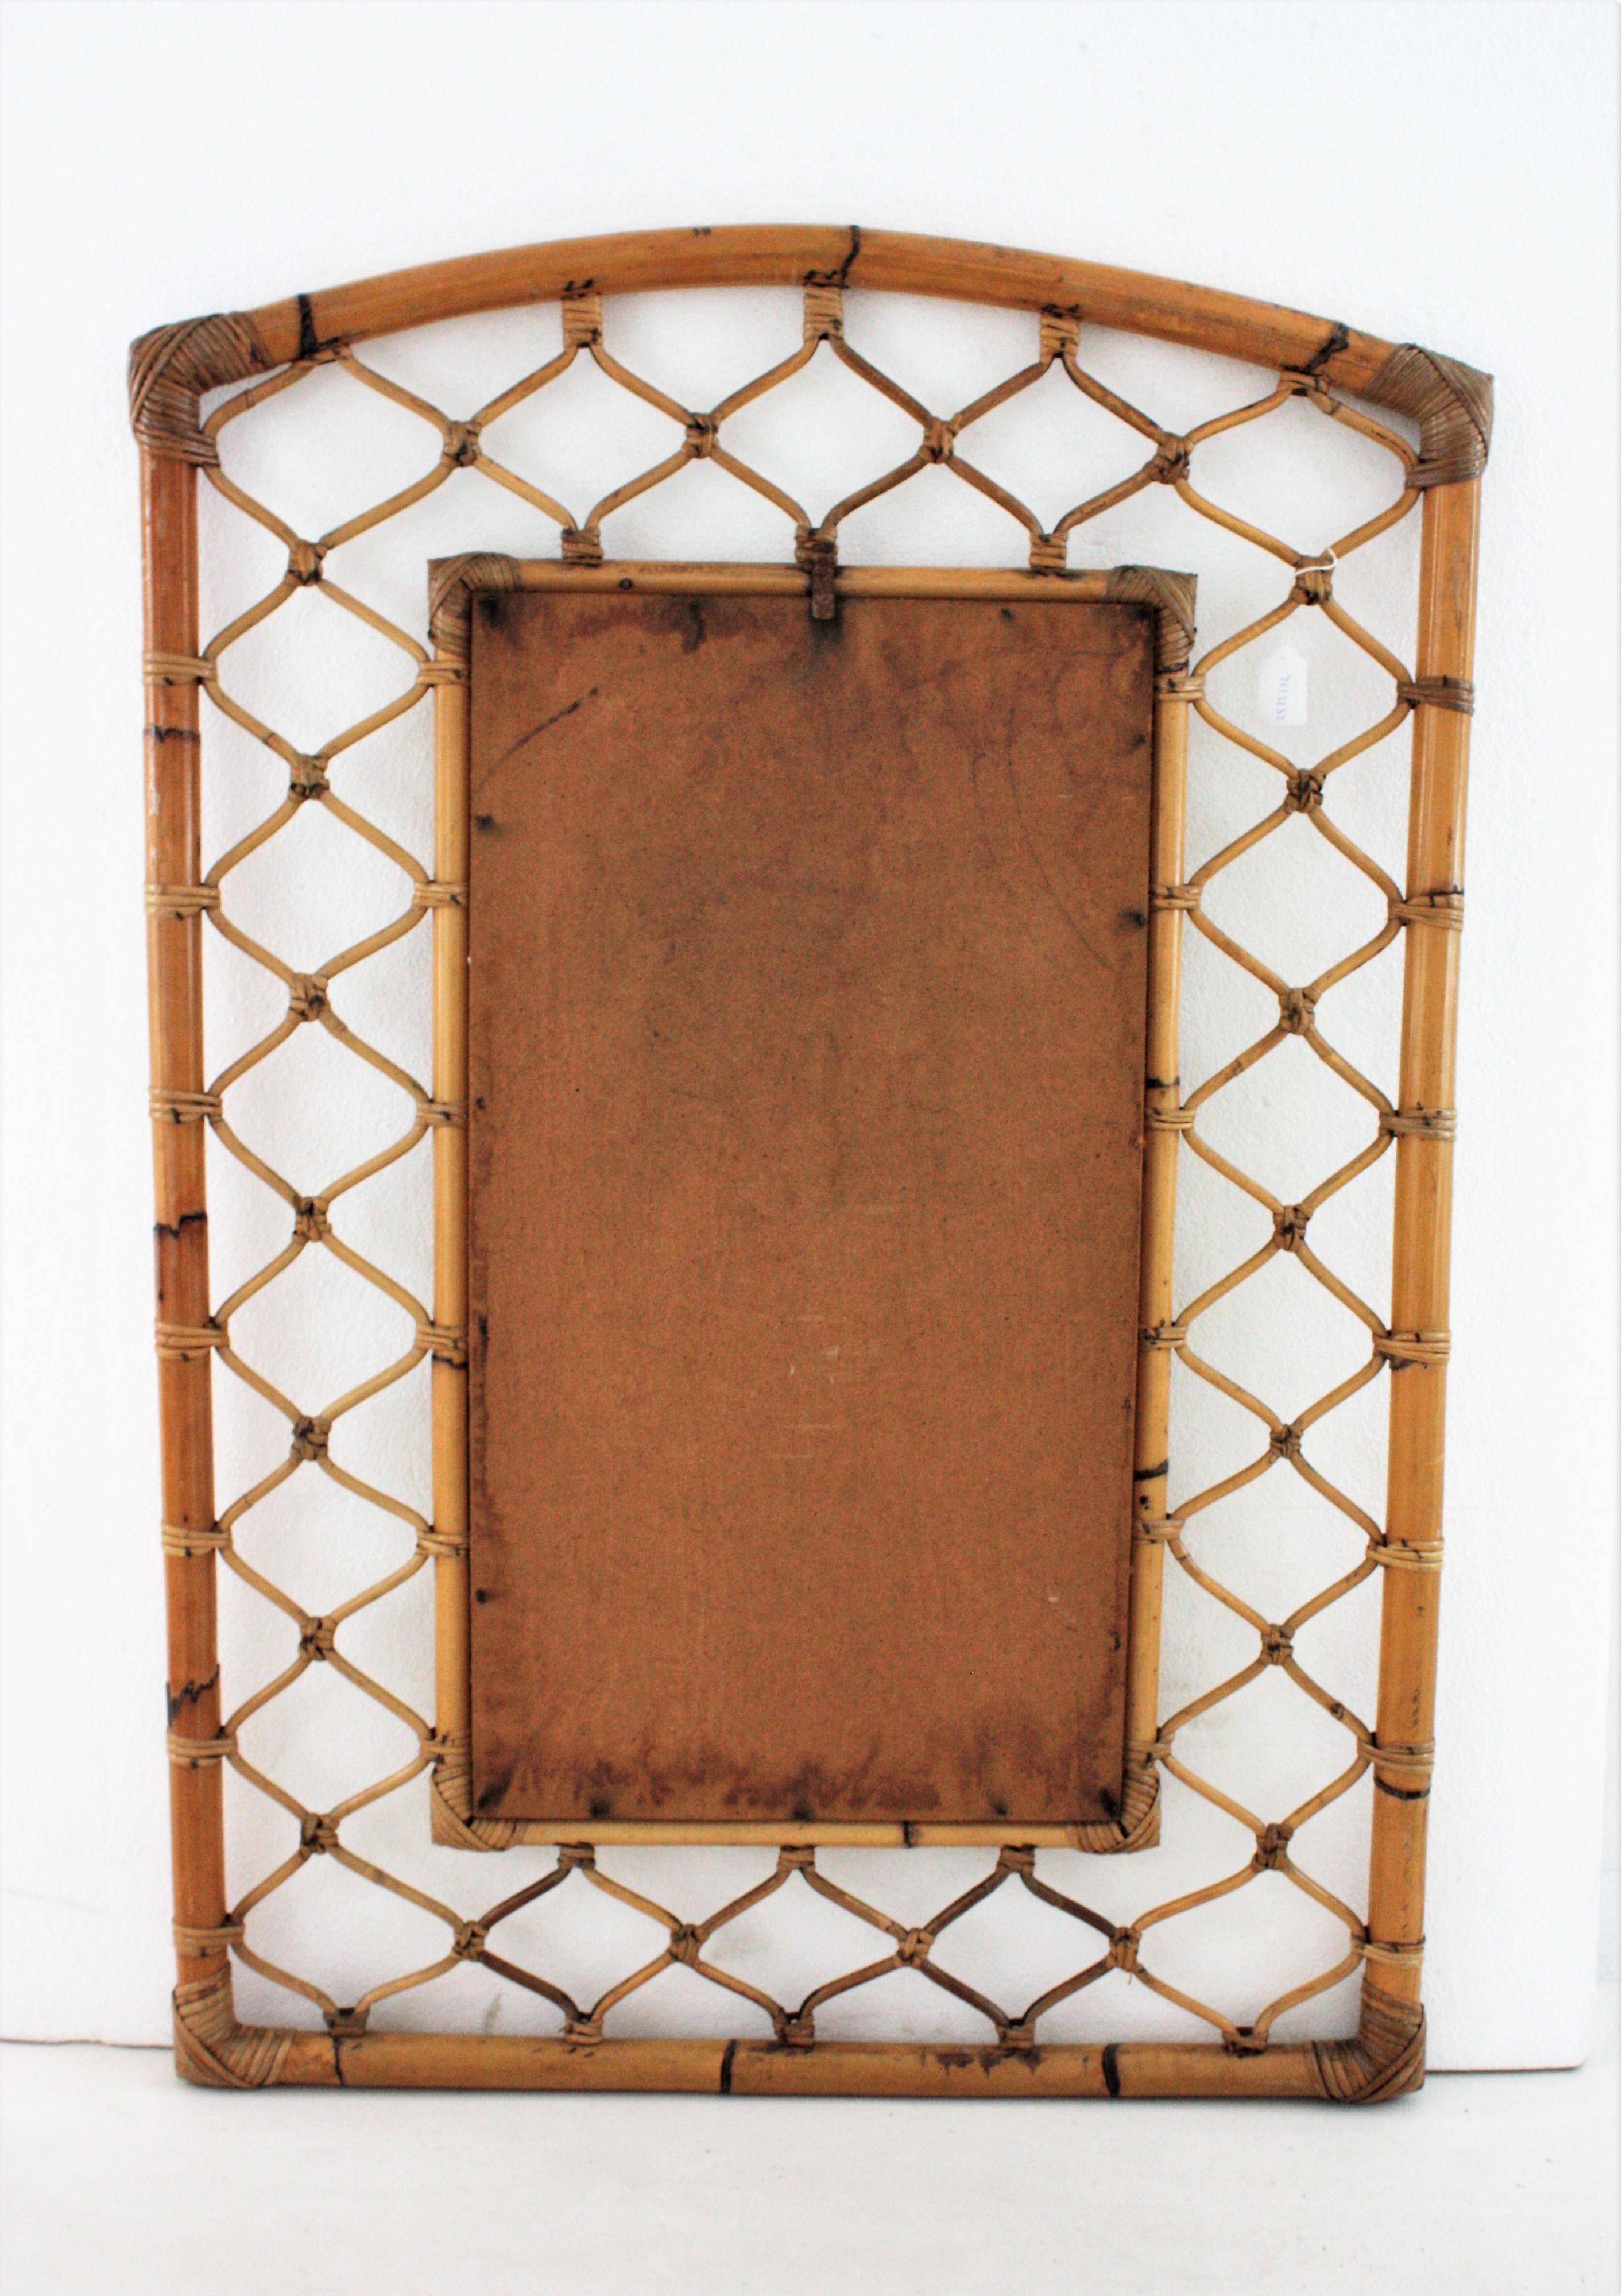 Rattan Bamboo Rectangular Large Mirror with Grid Frame, 1960s For Sale 1